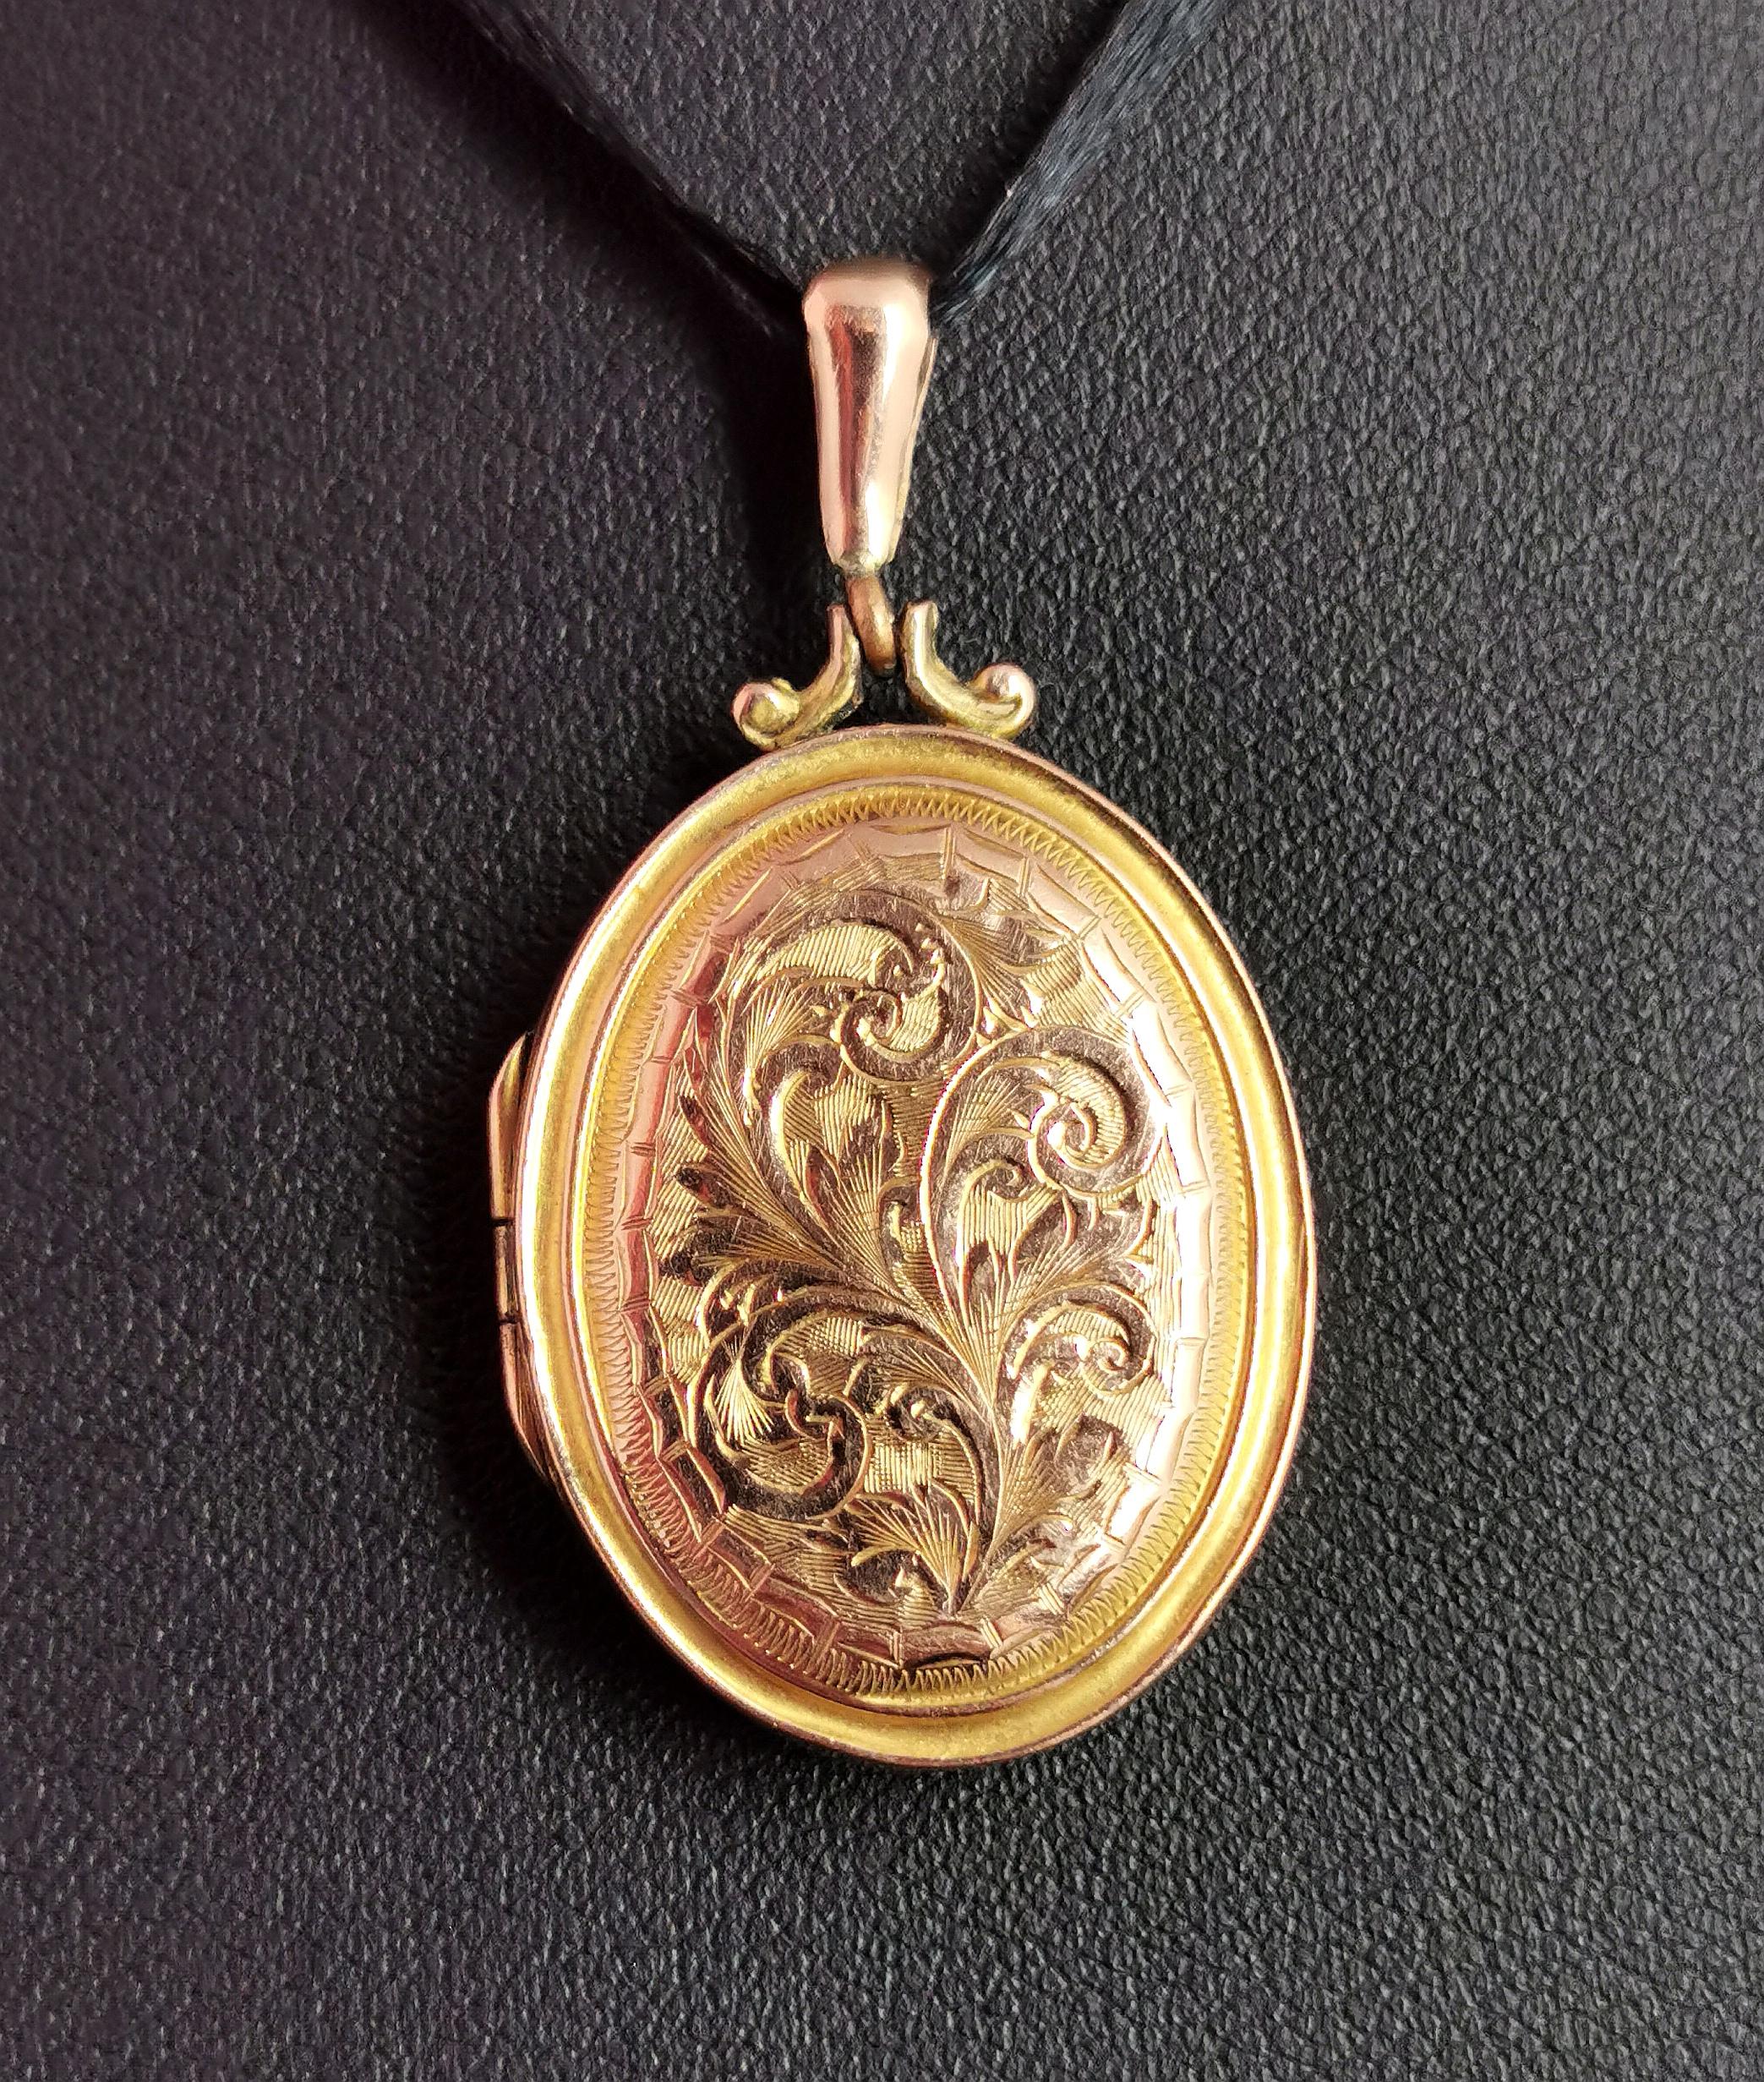 A delightful antique 9kt yellow gold front and back locket.

Edwardian era it has an elaborately chased and engraved front with leaves and foliate, there is a smooth polished heart cartouche to the centre of the reverse which has not been engraved